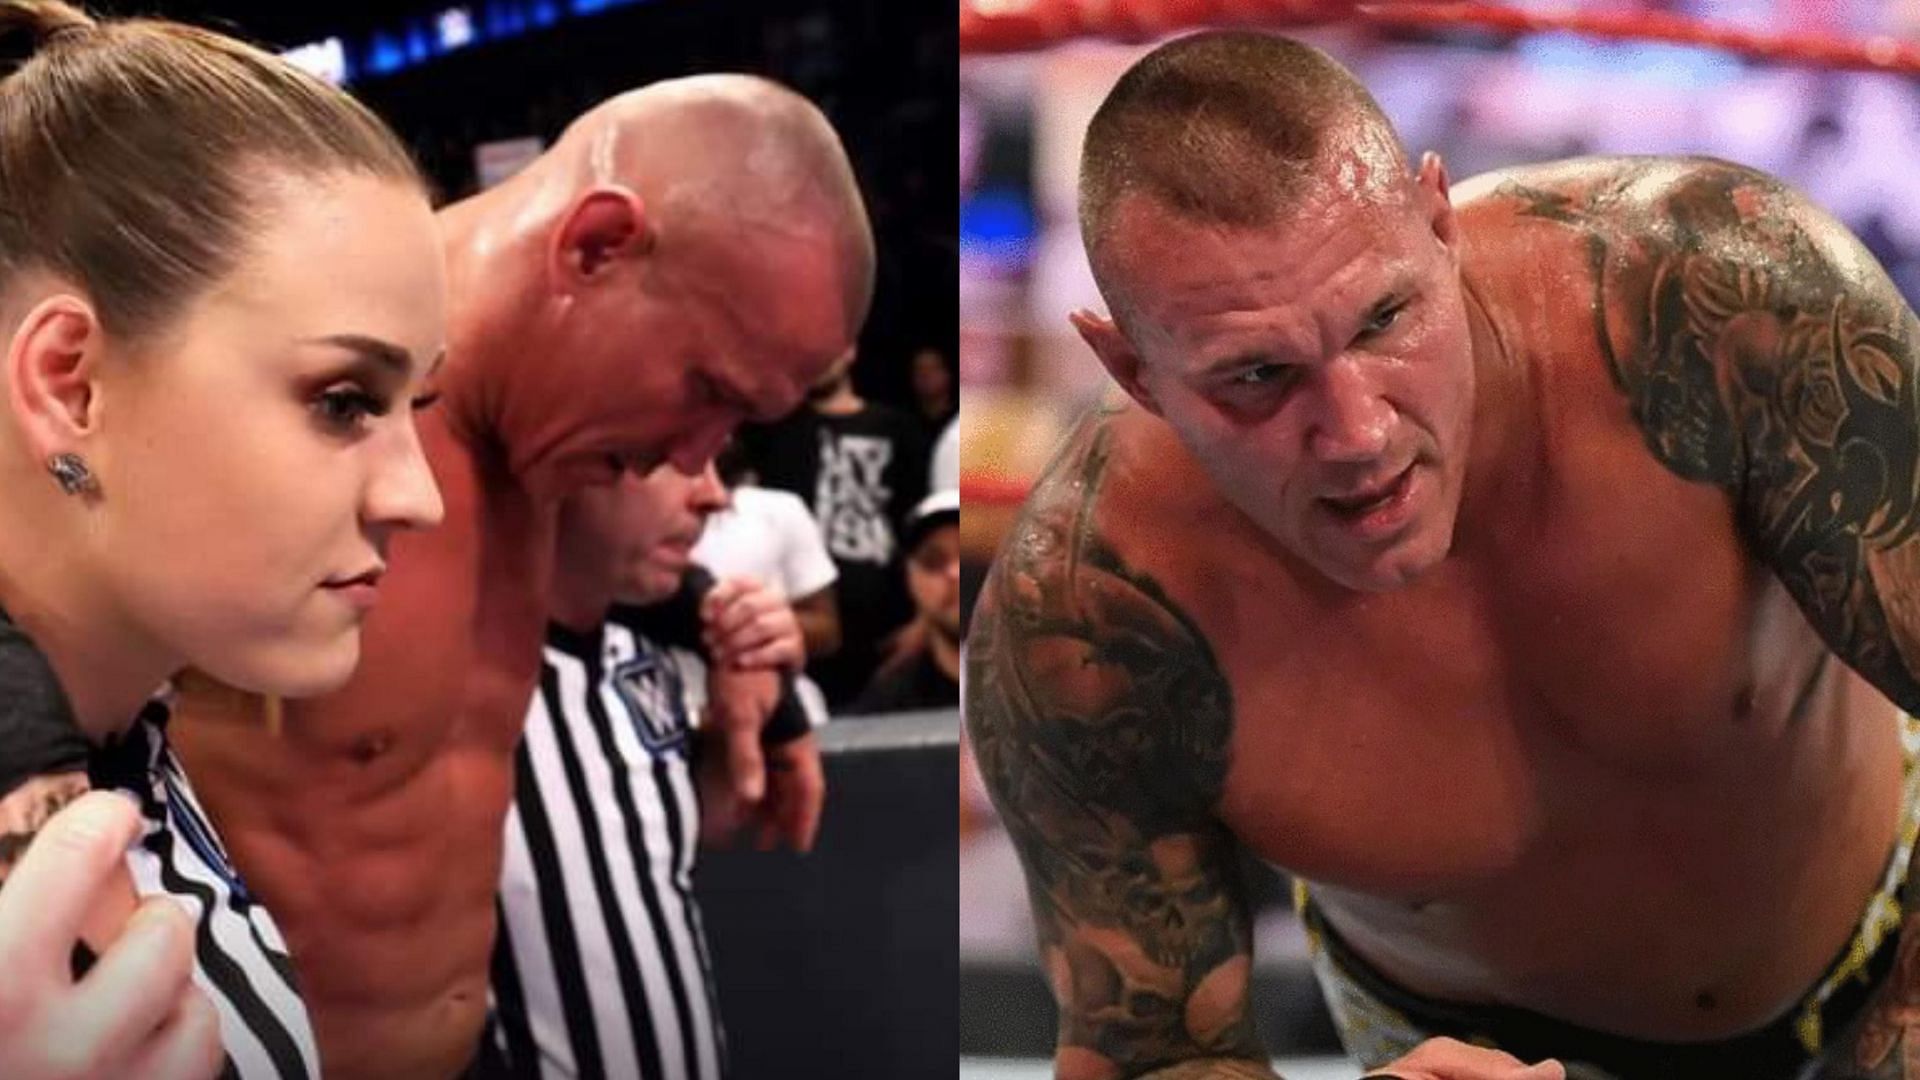 Randy Orton has been out action since May 2022